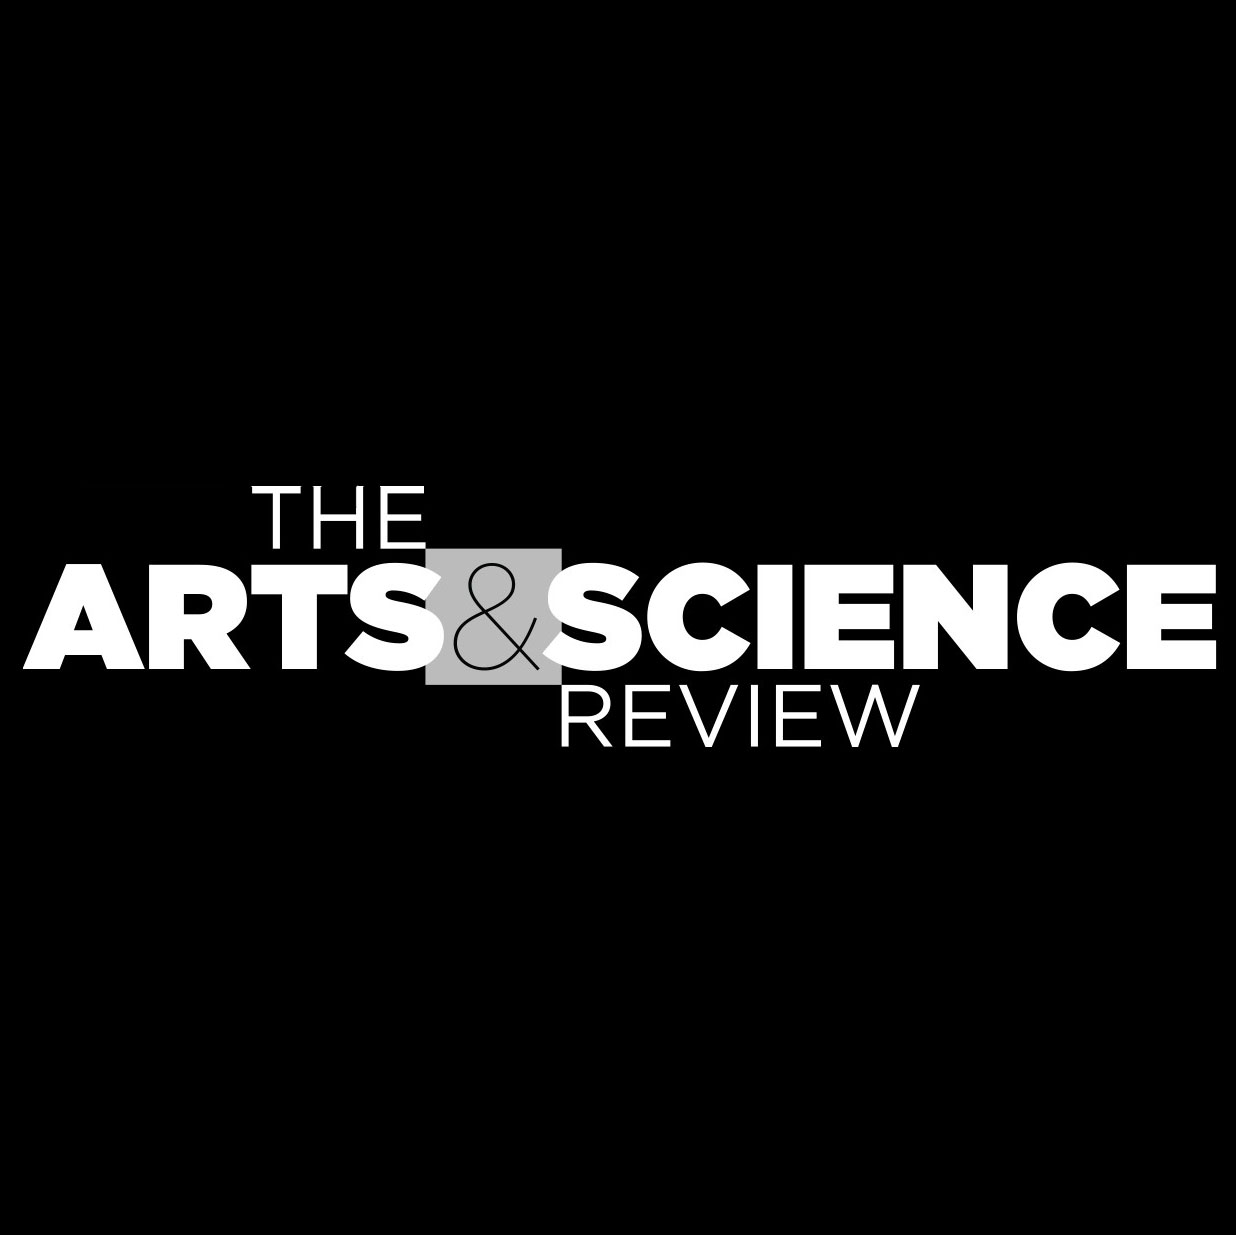 "The Arts & Science Review" in white text on black background